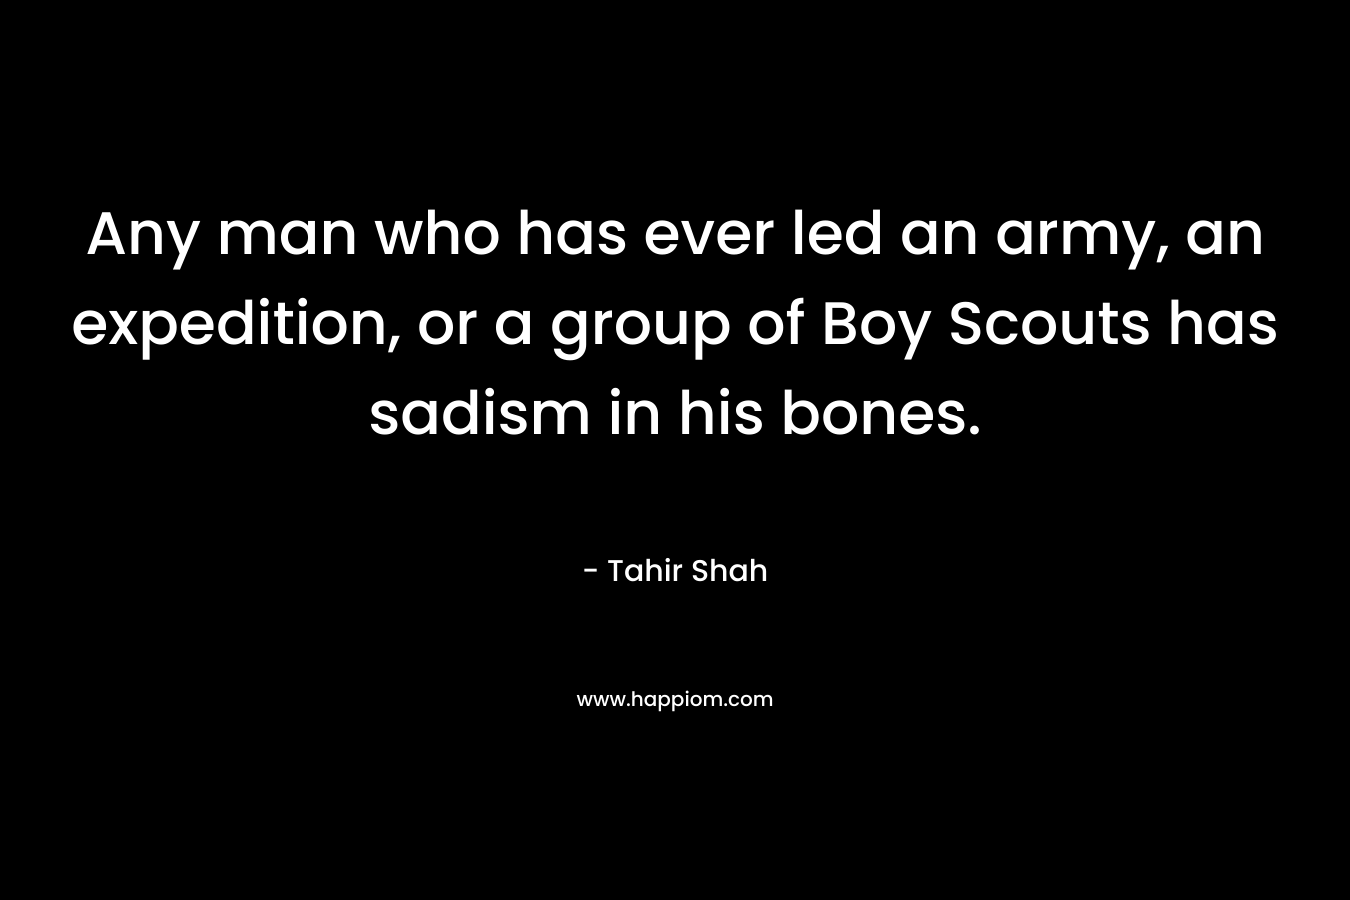 Any man who has ever led an army, an expedition, or a group of Boy Scouts has sadism in his bones. – Tahir Shah